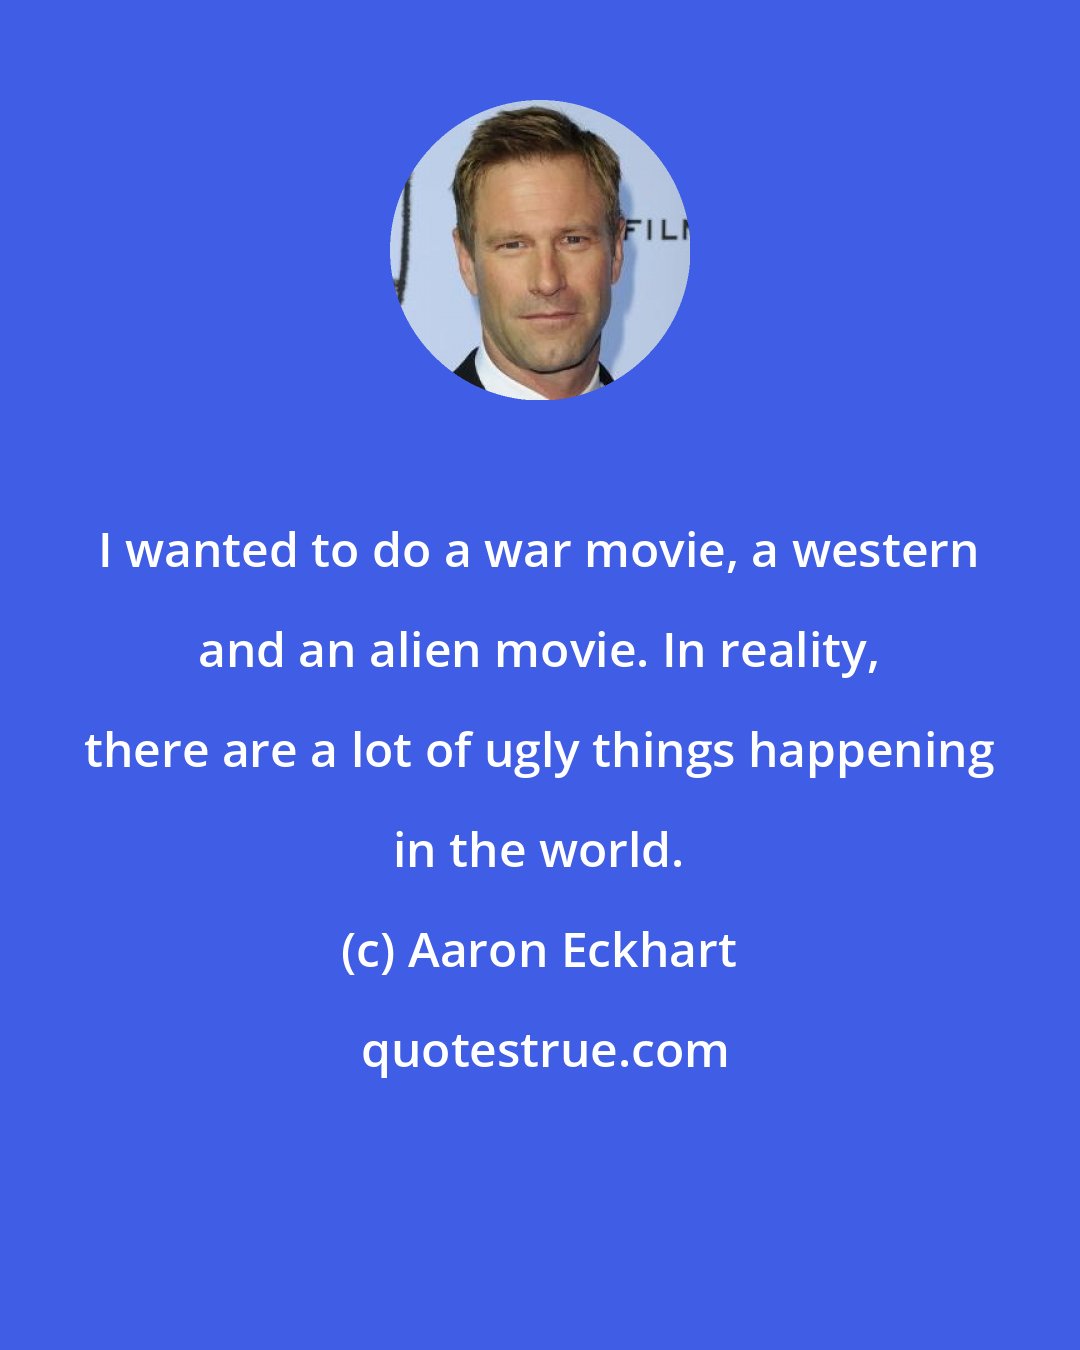 Aaron Eckhart: I wanted to do a war movie, a western and an alien movie. In reality, there are a lot of ugly things happening in the world.